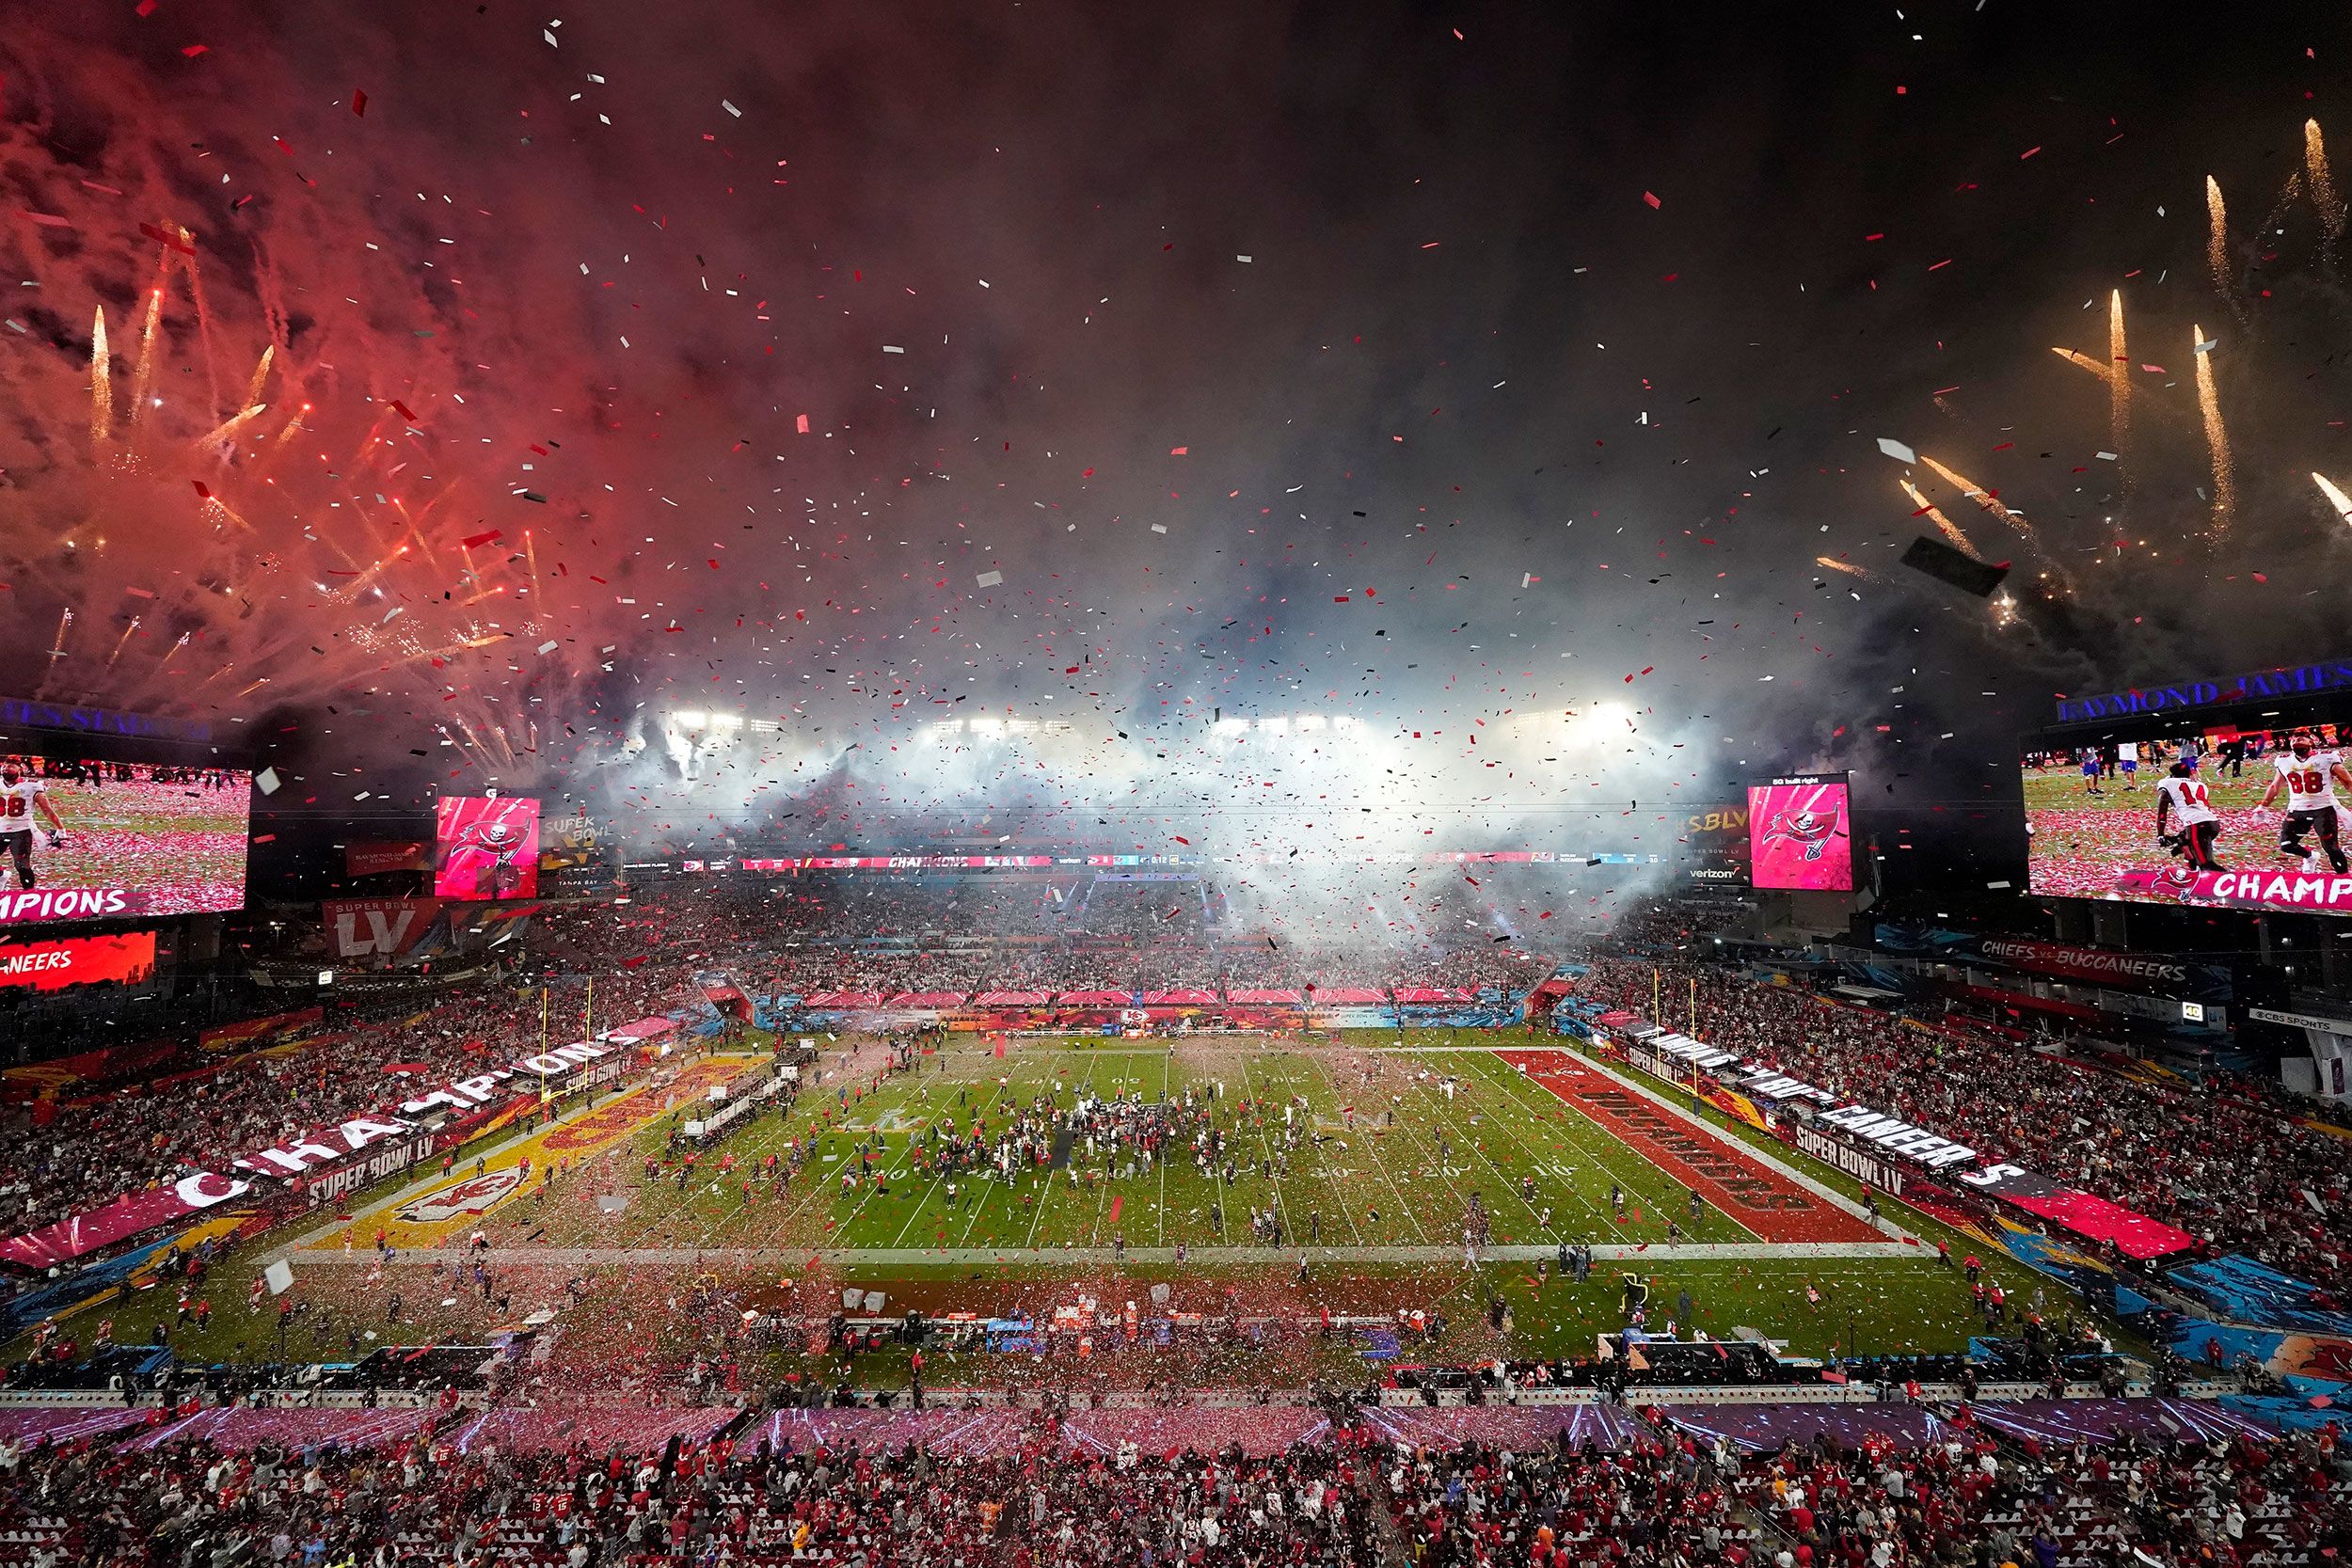 The best photos from the 2021 Super Bowl